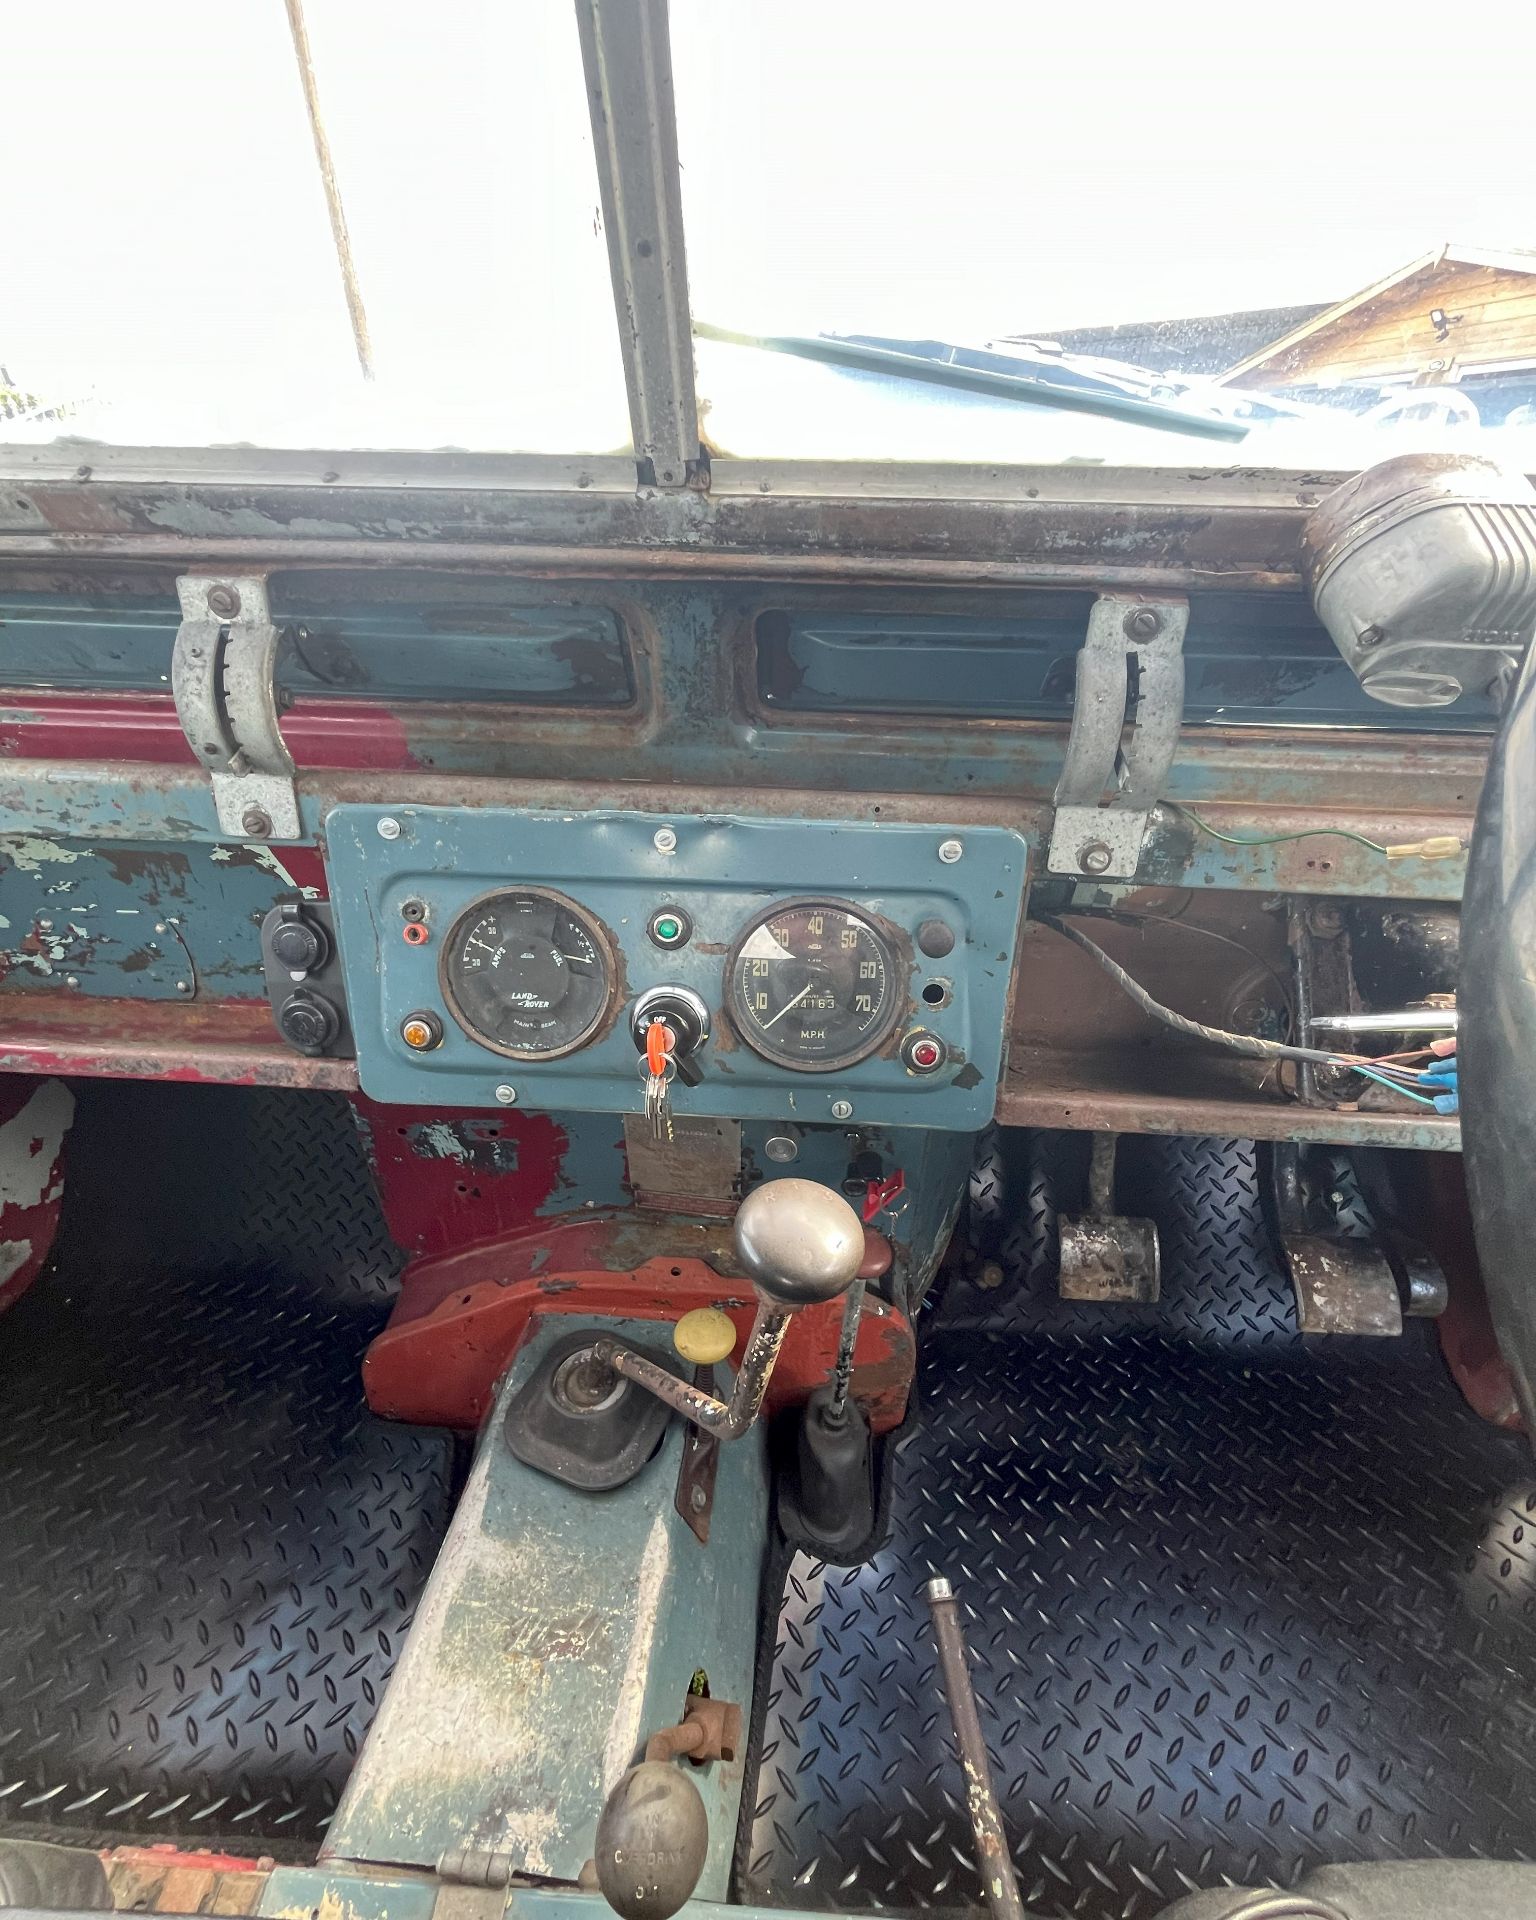 1962 Land Rover 88 Series II, petrol 2.25 litre engine, blue with 64,078 showing on the milometer, - Image 11 of 14